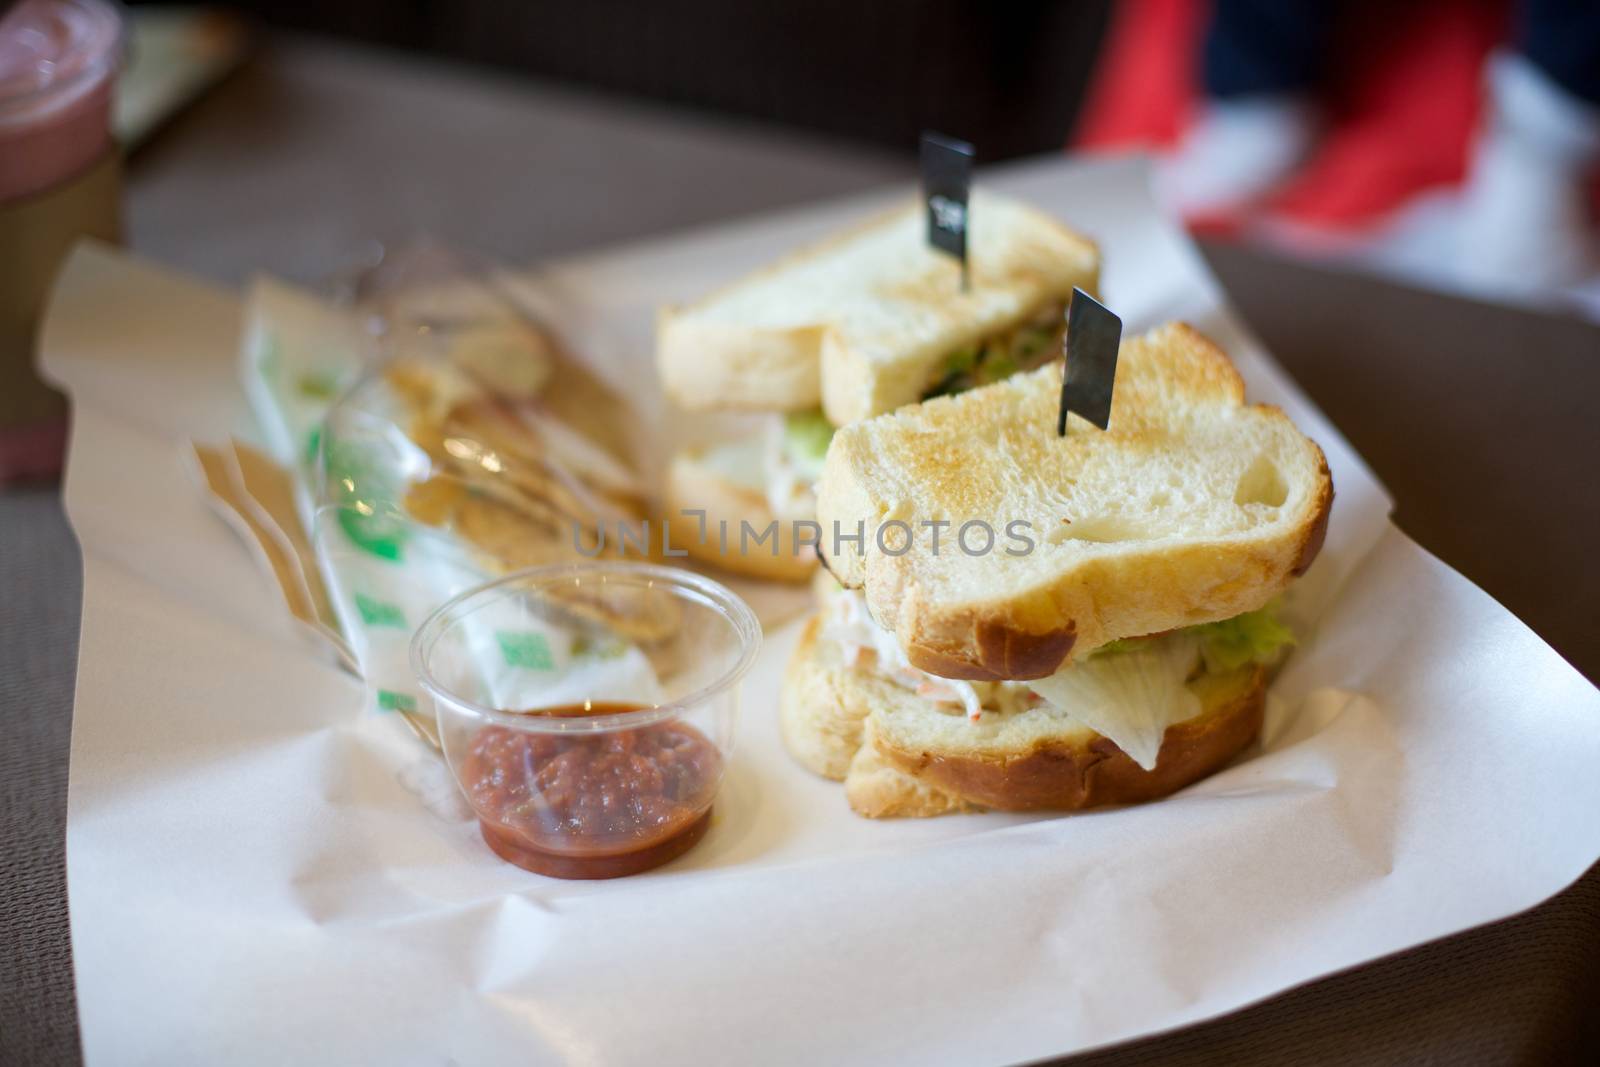 Two slices of sandwich and sauce on white paper by uphotopia